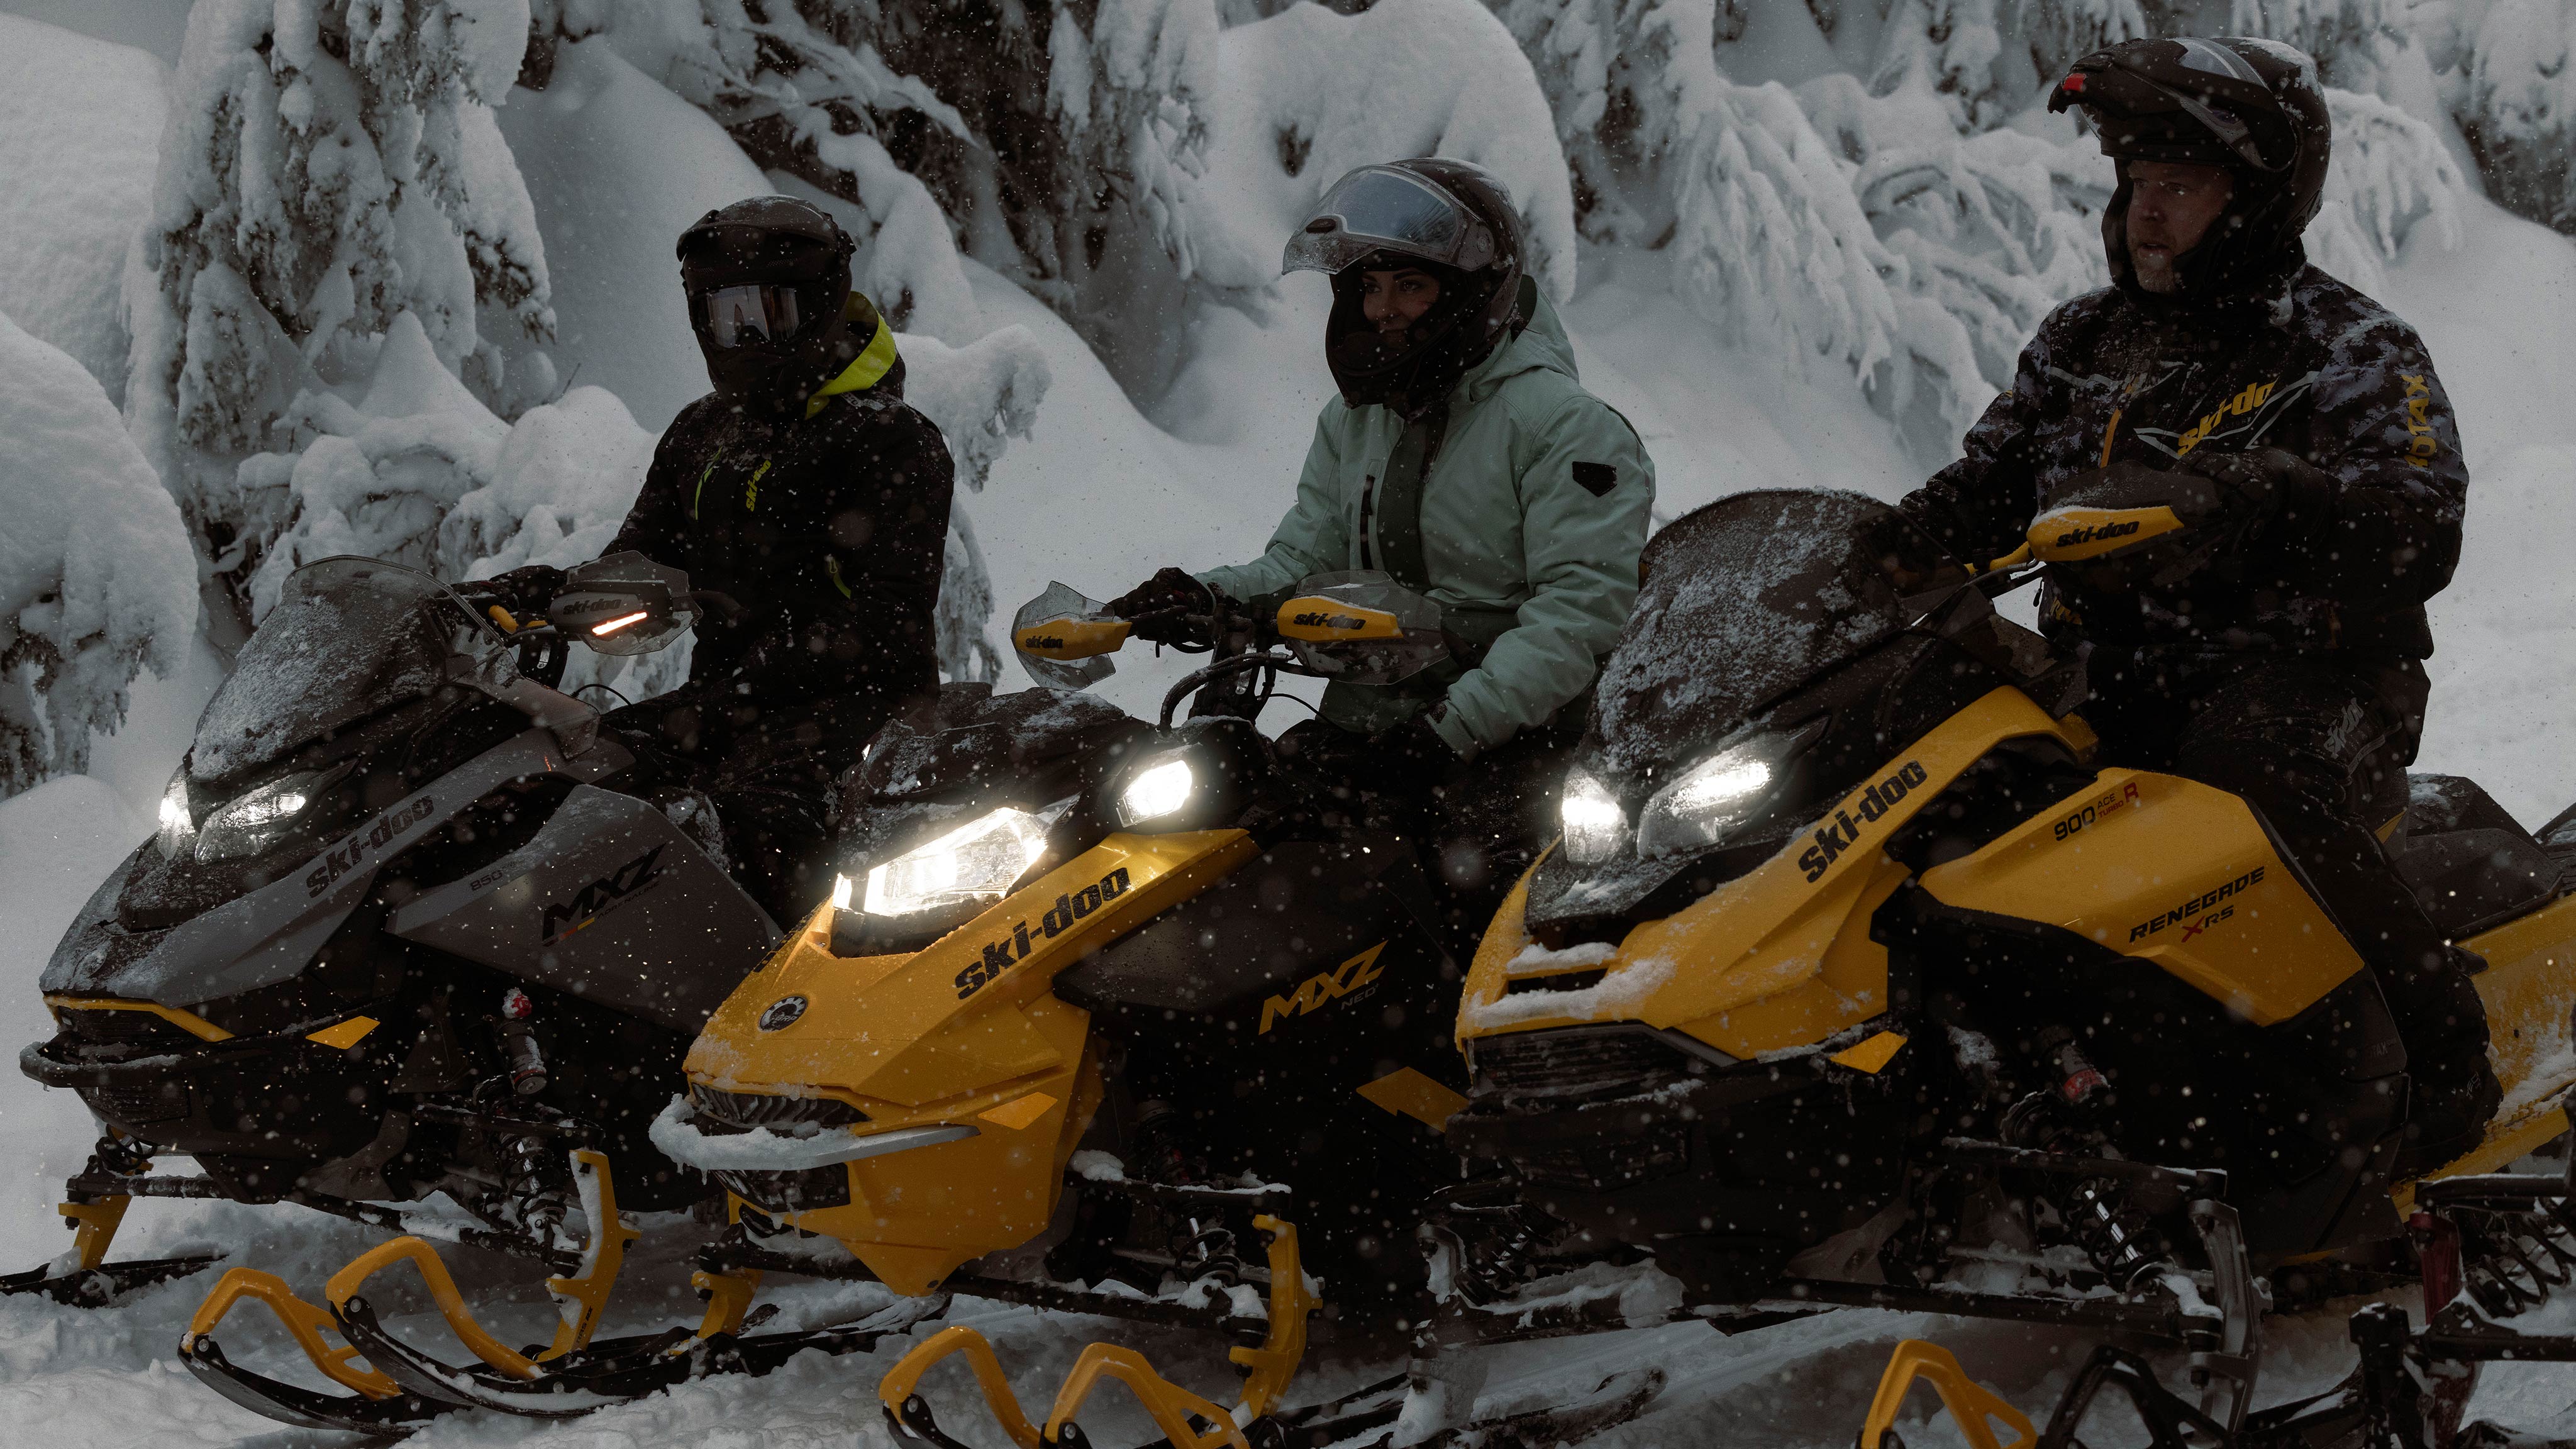 Three riders taking a break from a snowy ride on their Ski-Doo snowmobiles